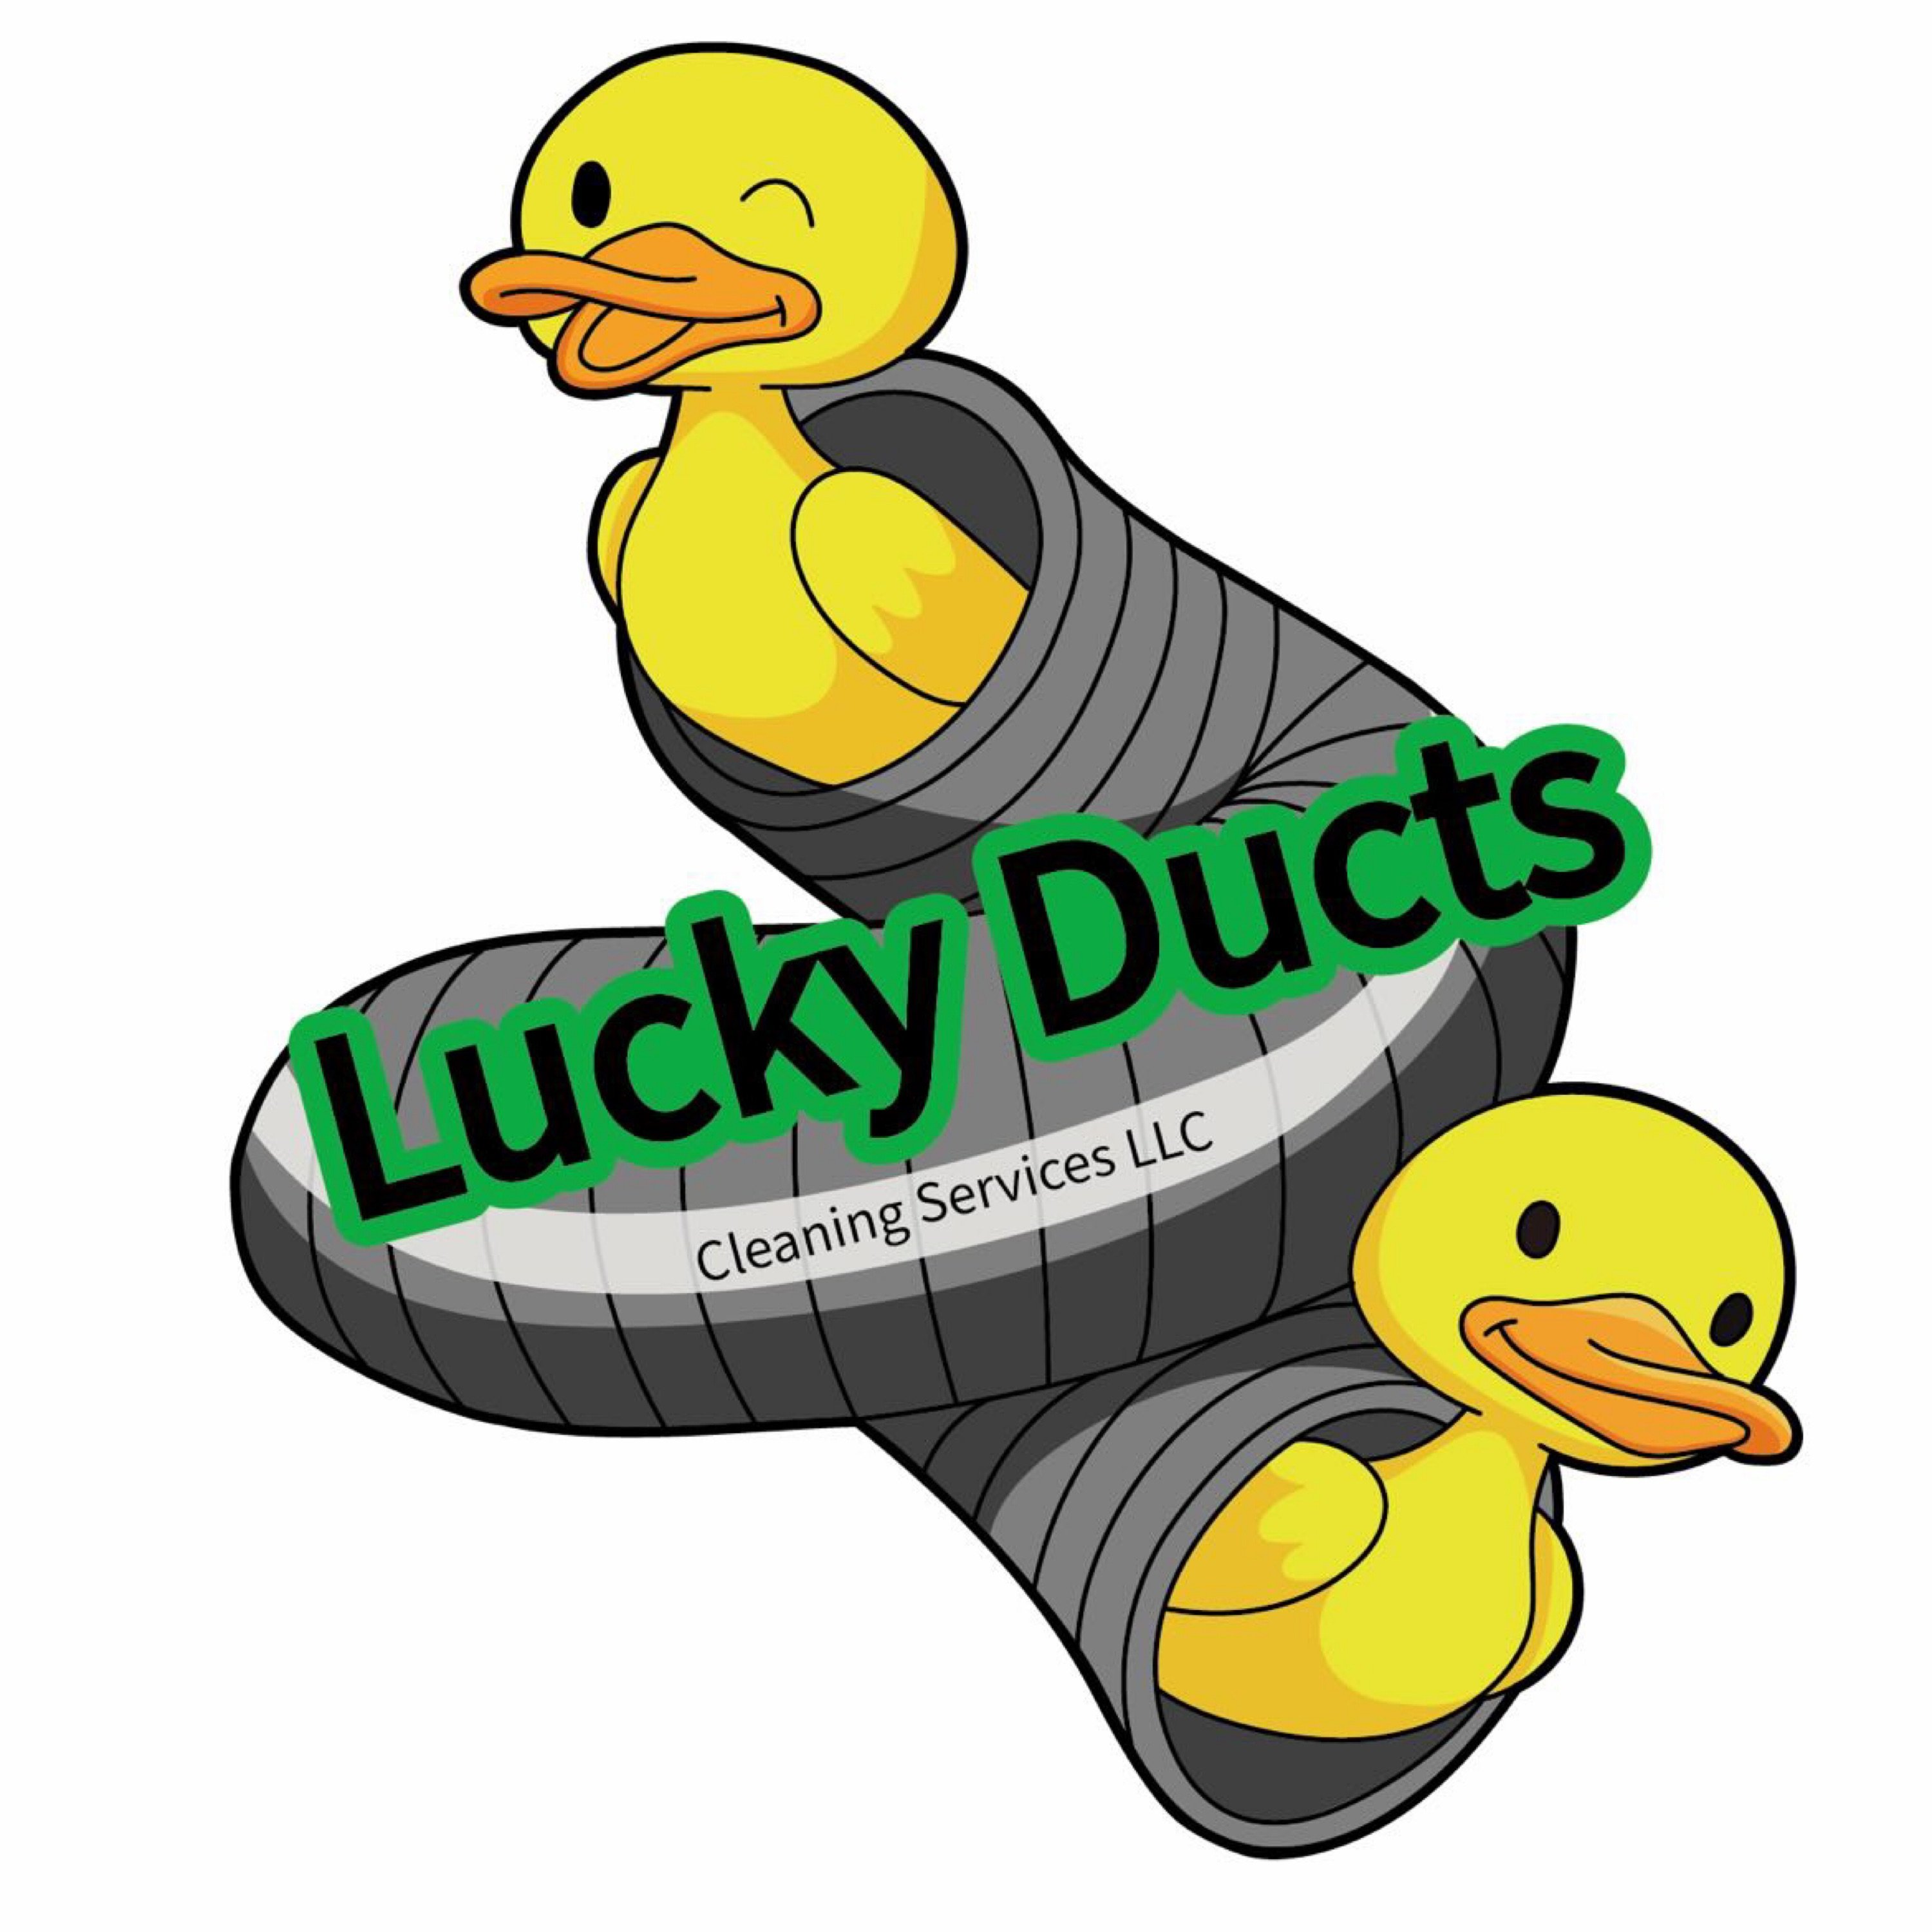 Lucky Ducts Cleaning Services Logo